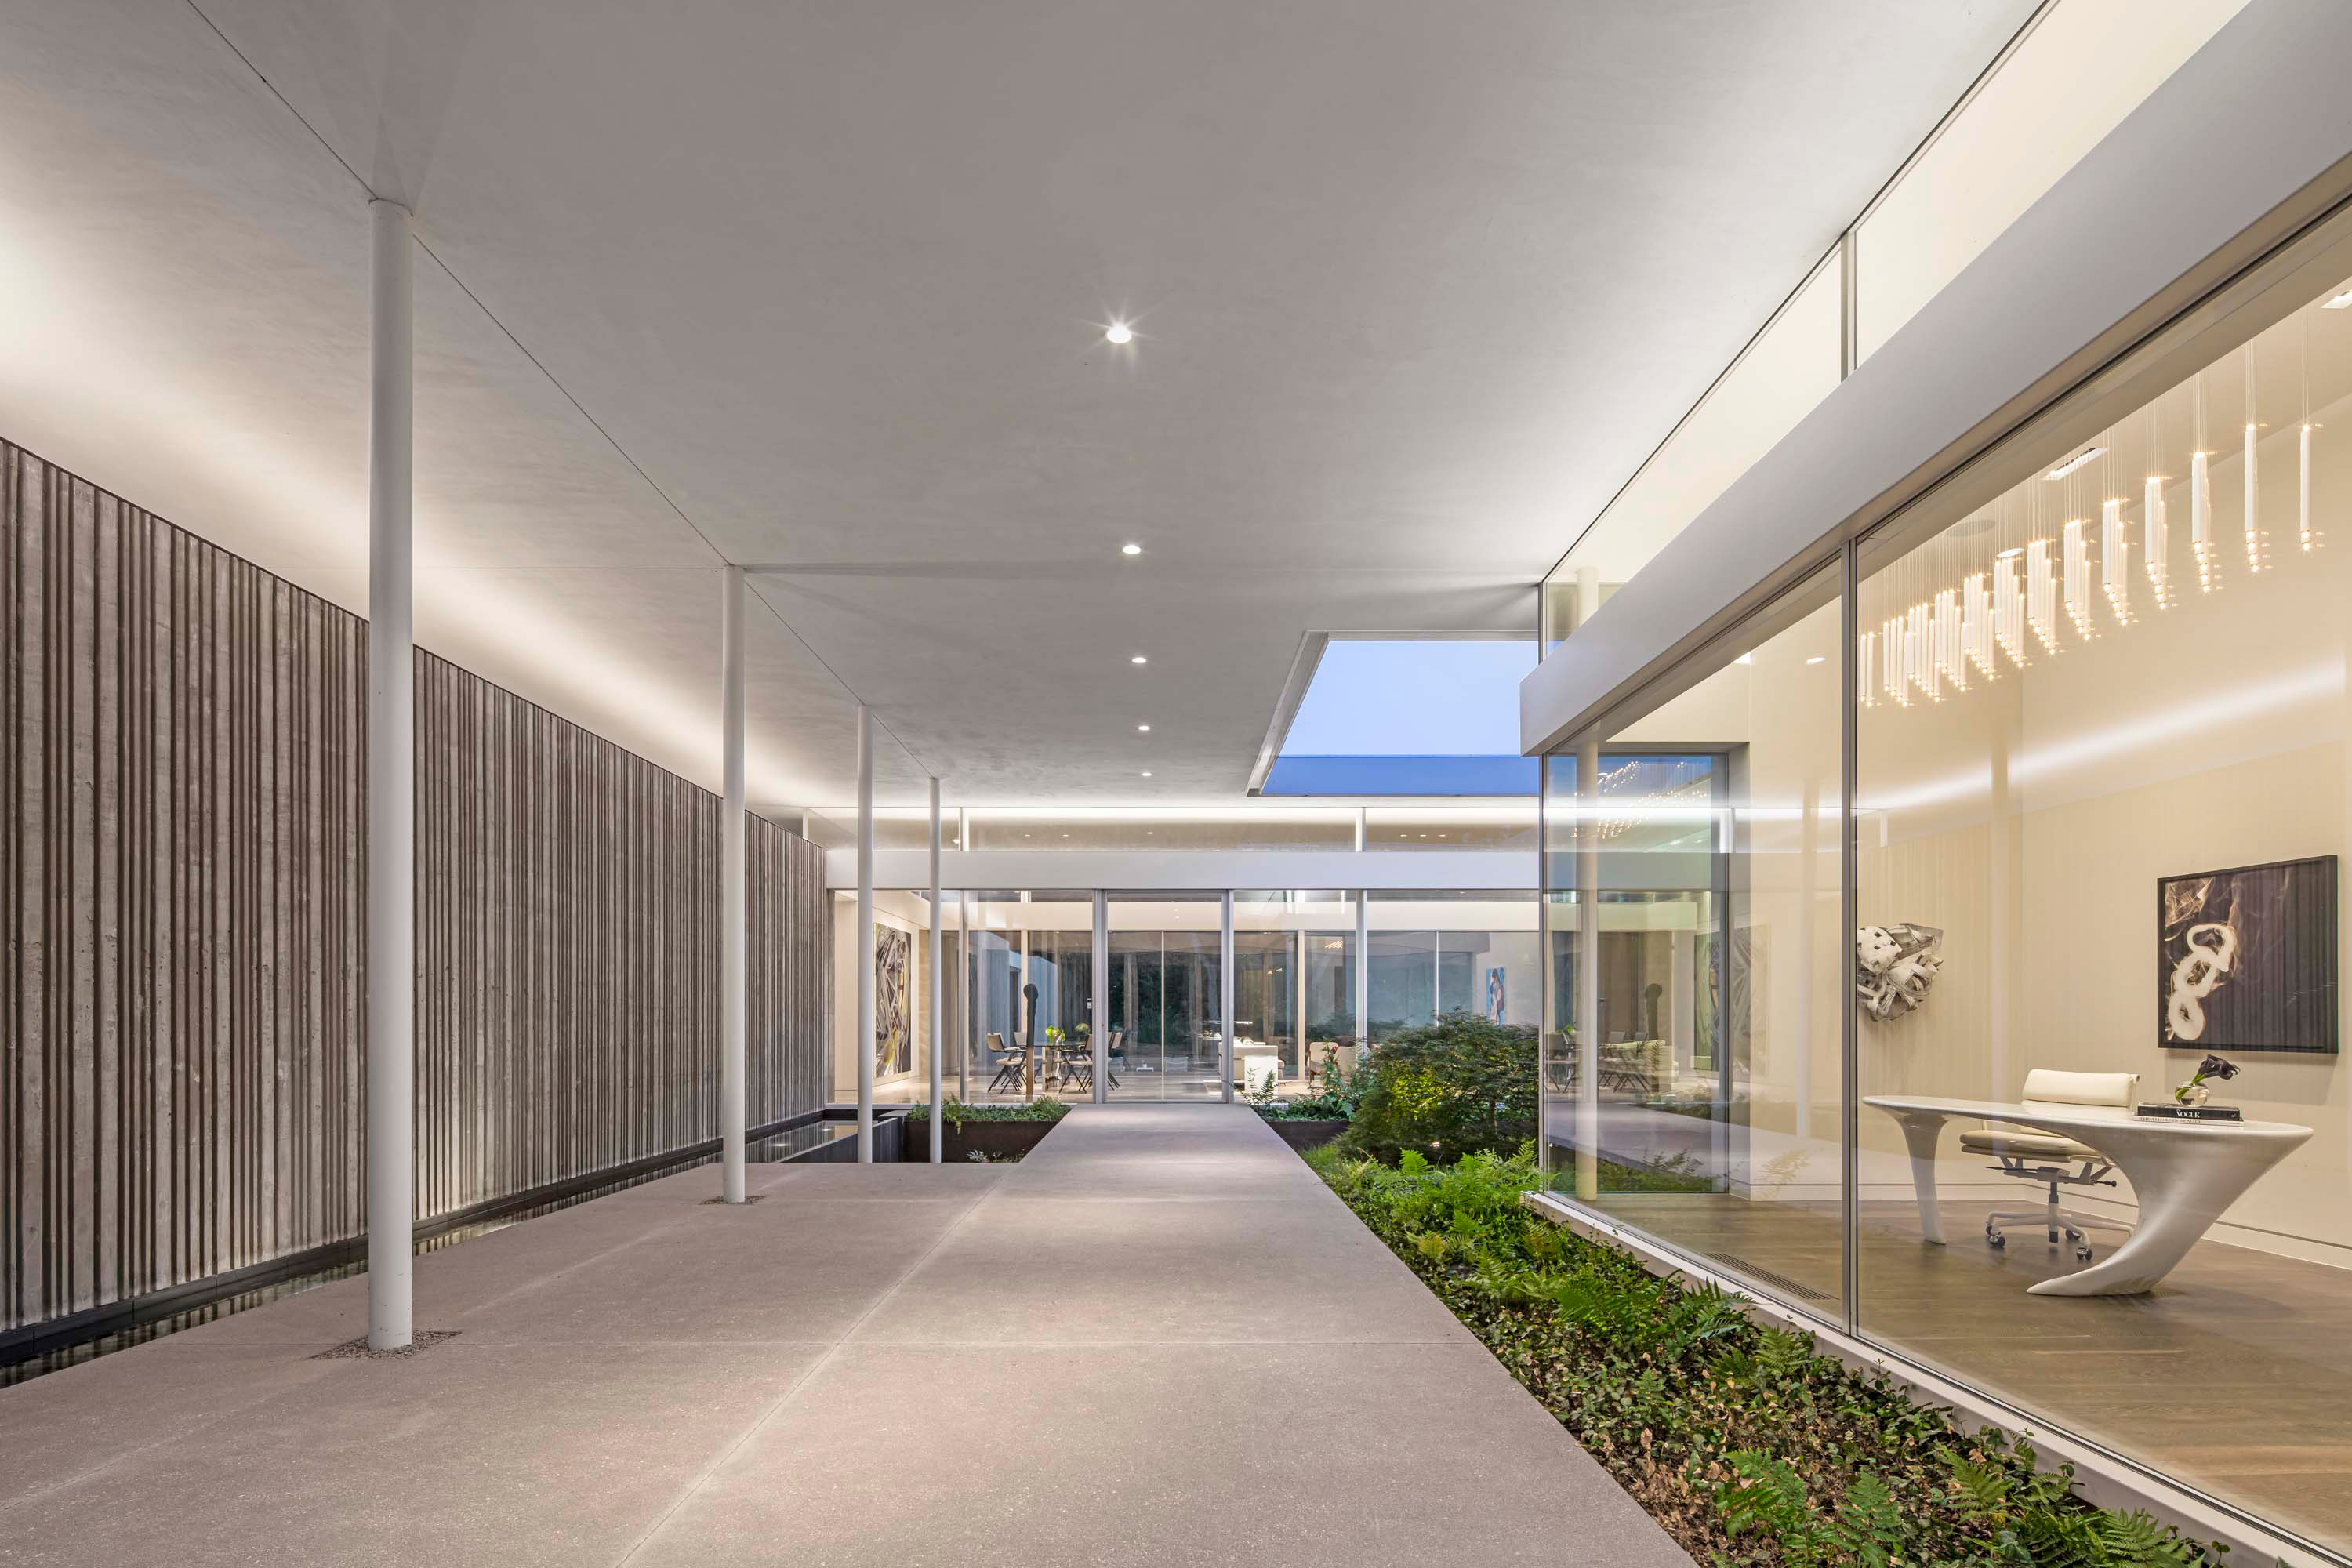 Hallway photo of the Preston Hollow Residence by Specht Novak Architects. Shot by Manolo Langis, featuring a welcoming hallway with a row of columns, greenery, and office space.